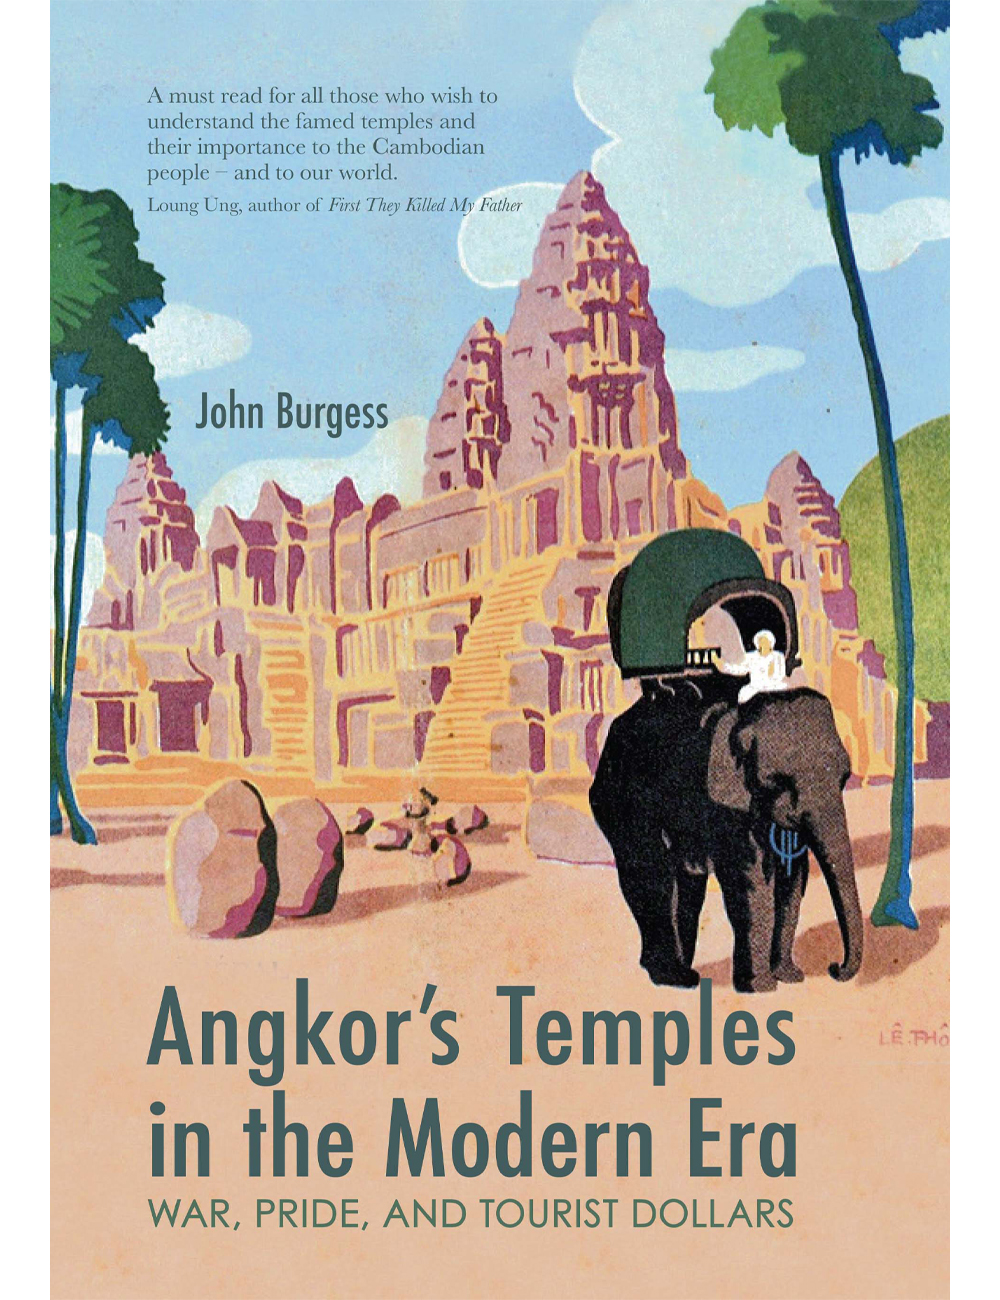 Angkor’s Temples in the Modern Era